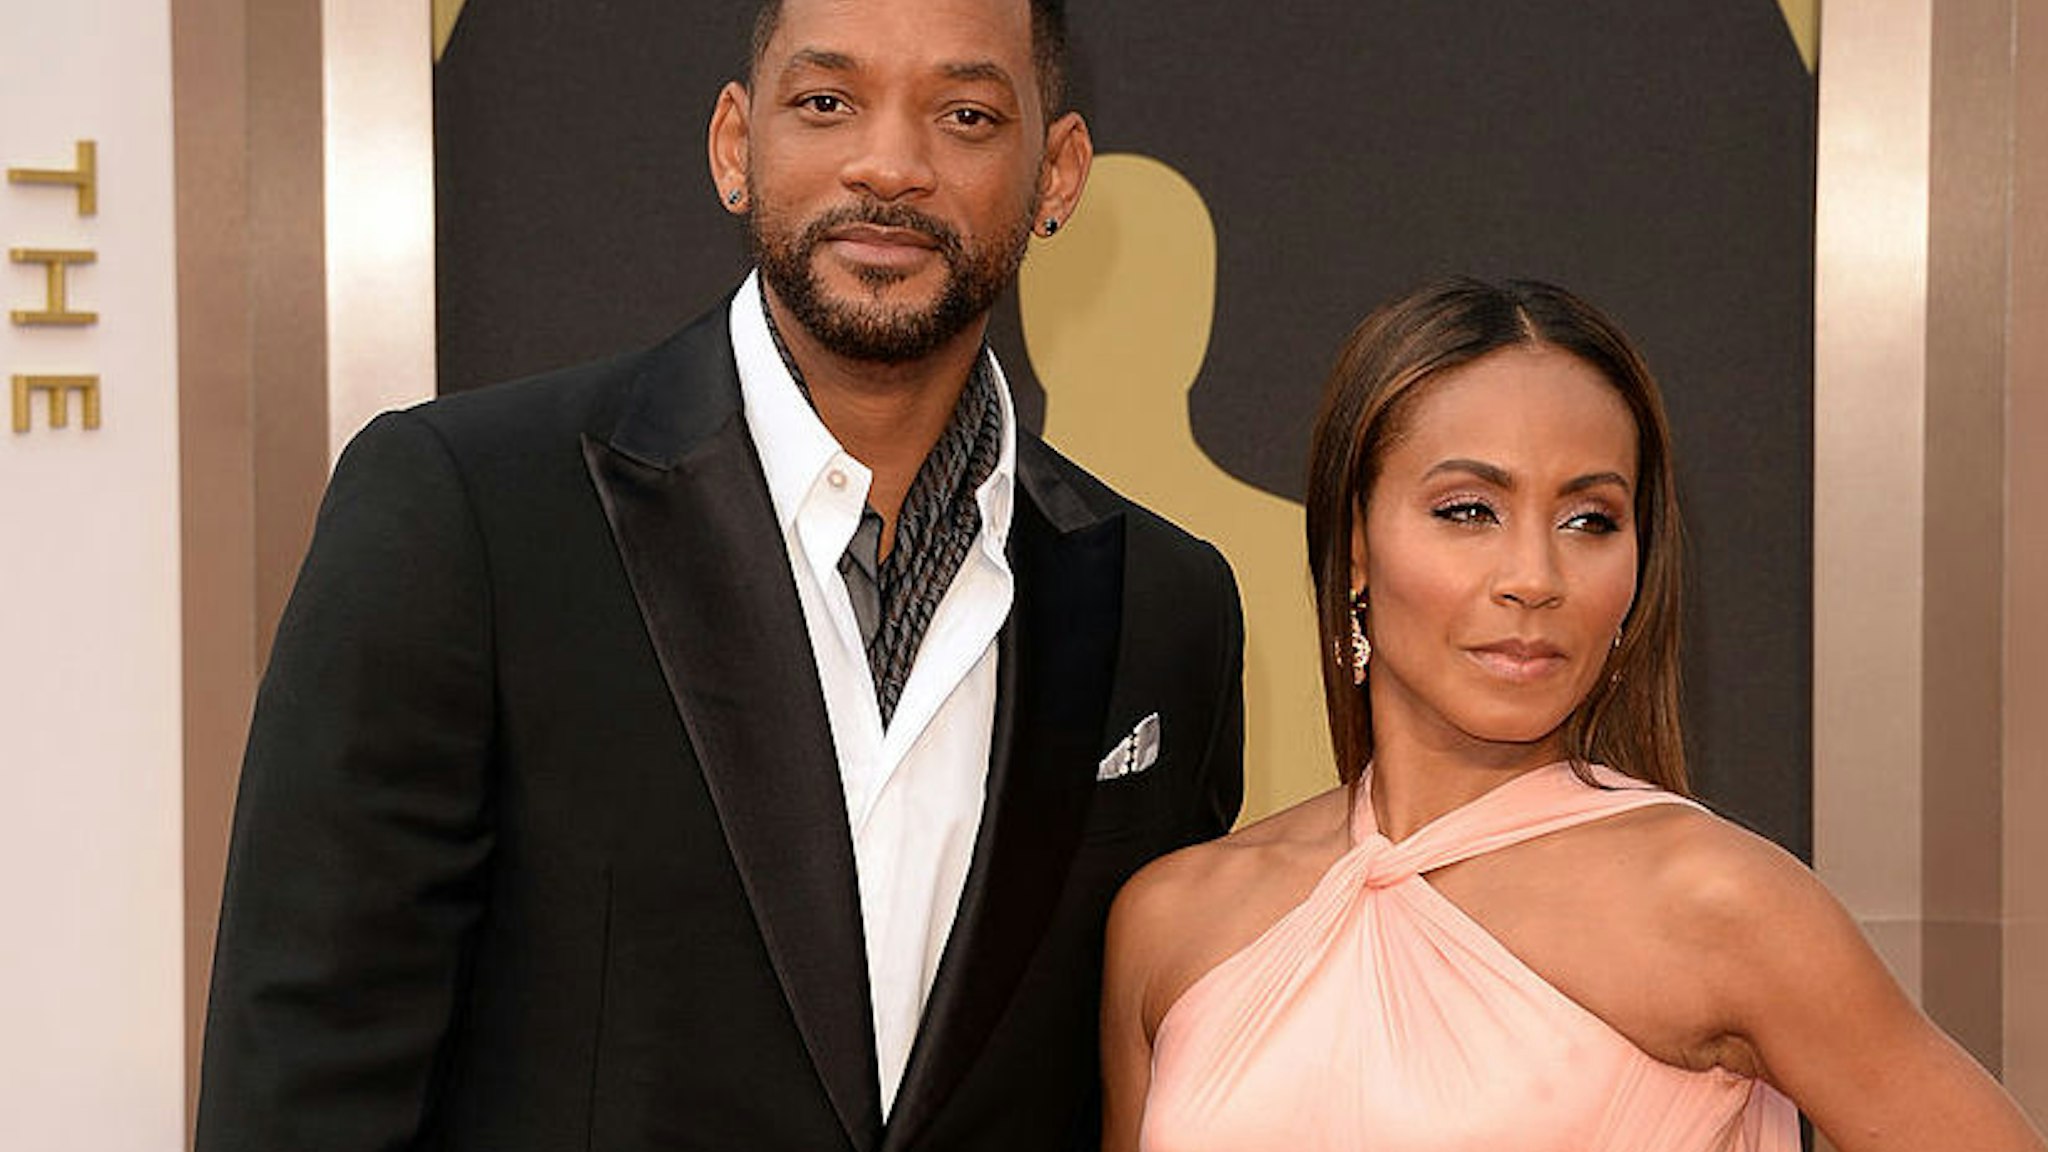 Actors Will Smith (L) and Jada Pinkett Smith attend the Oscars held at Hollywood & Highland Center on March 2, 2014 in Hollywood, California